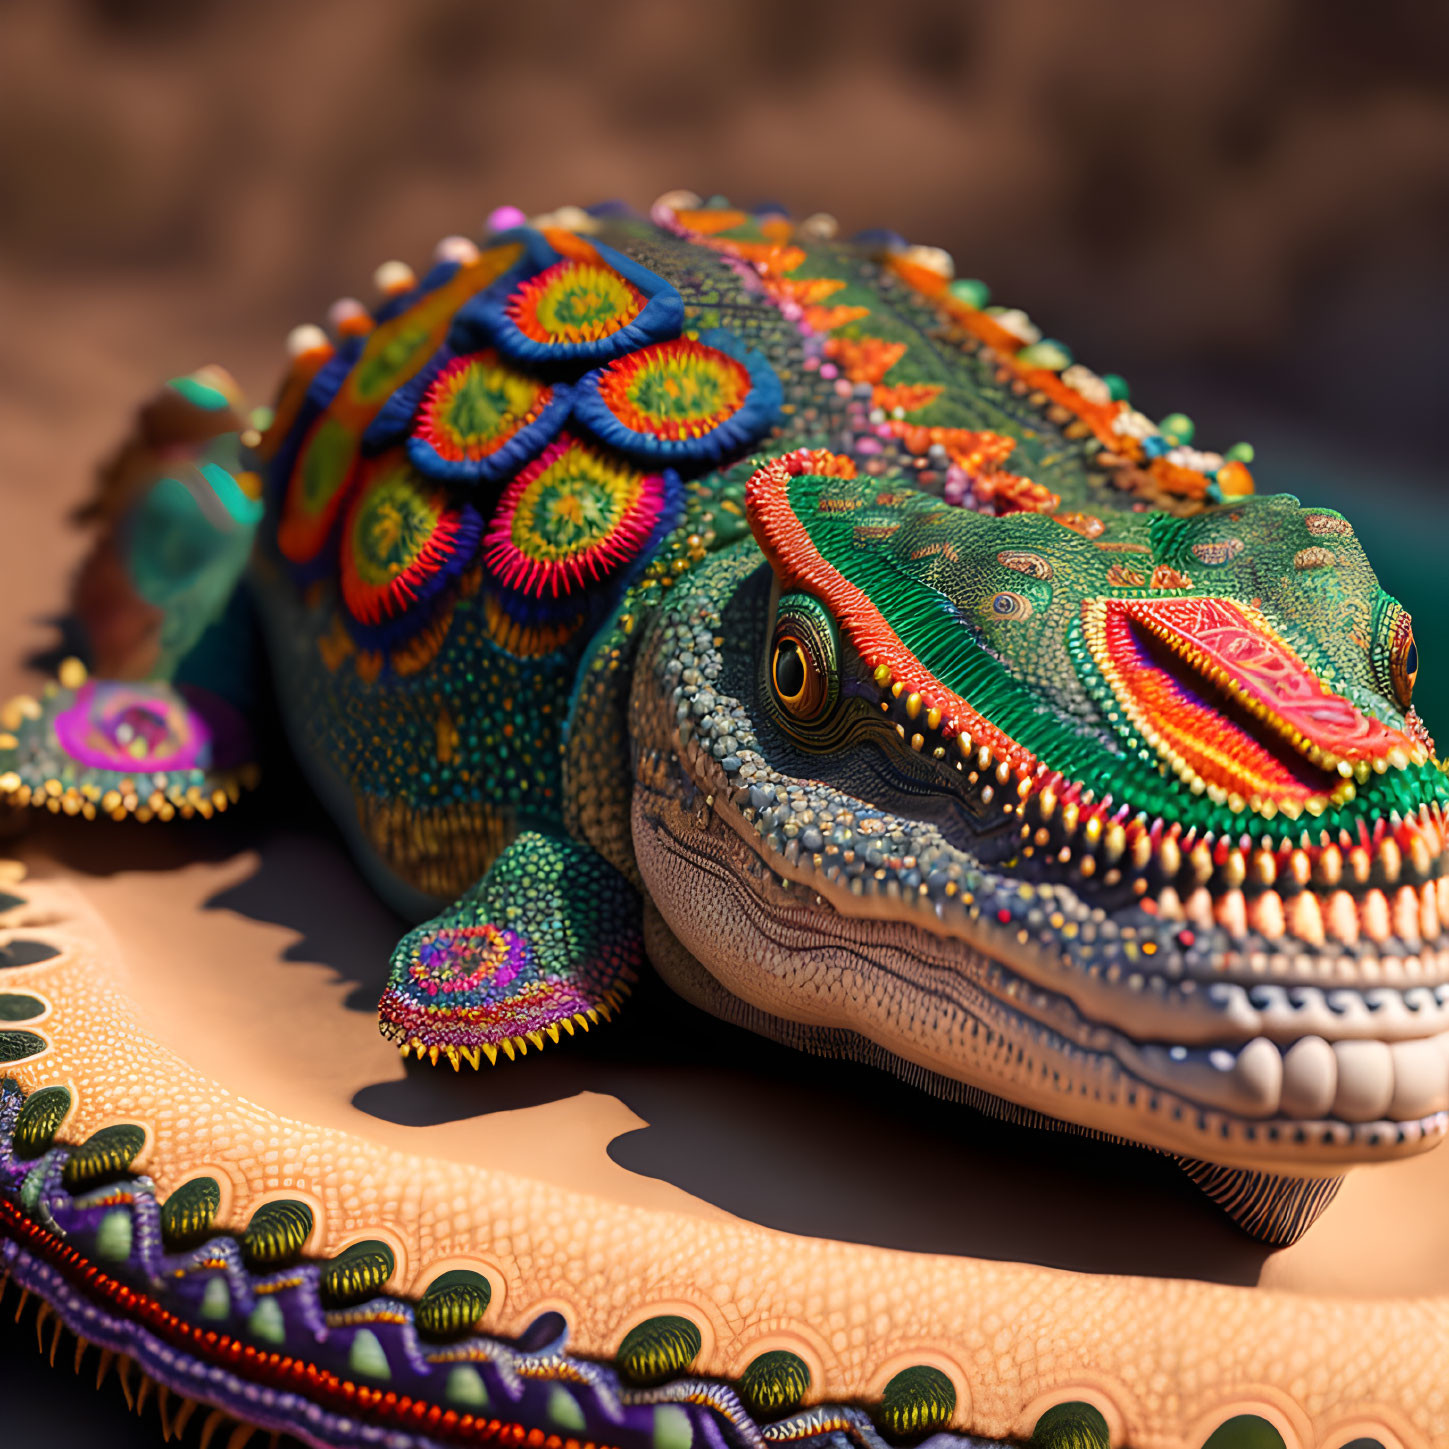 Colorful Beaded Art: Detailed Alligator with Vibrant Patterns